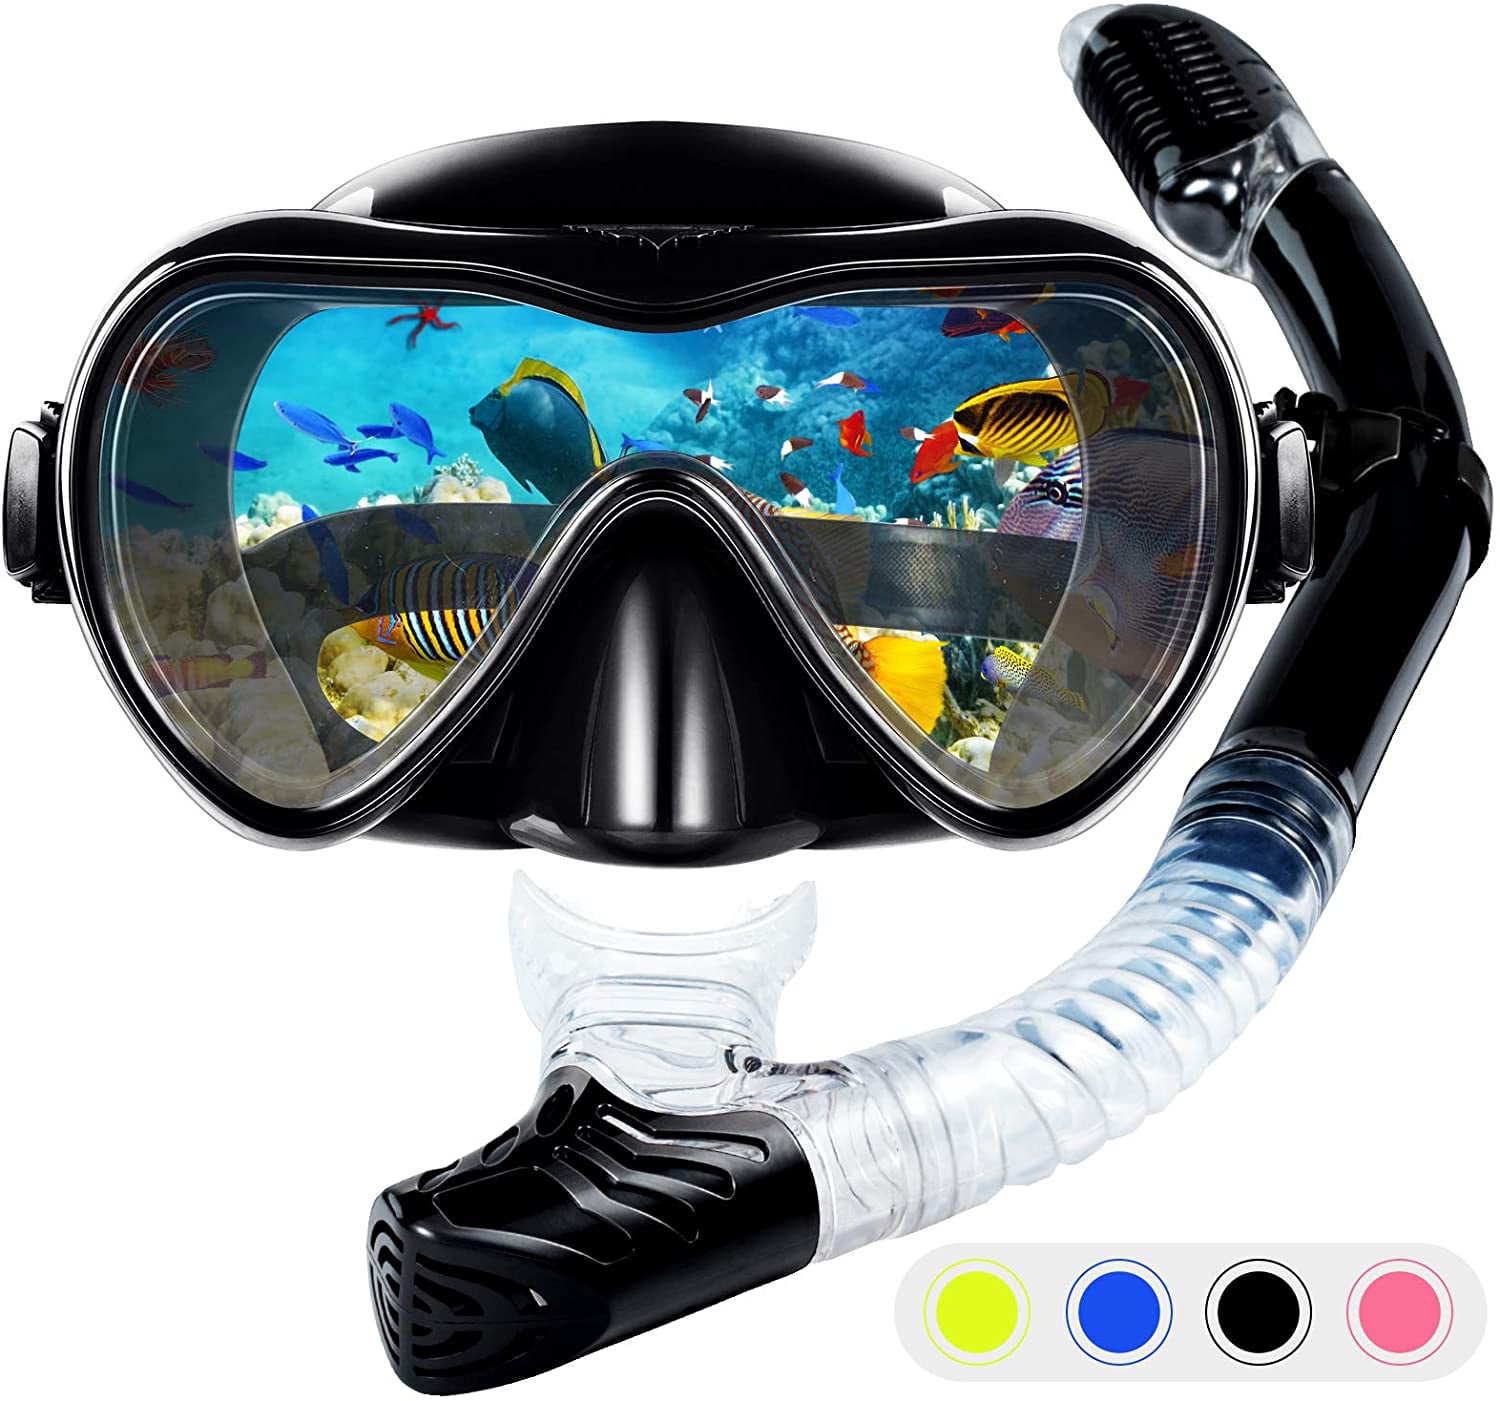 Snorkeling Gear Gear Silicone Breathe Easily Underwater for Eyes Protect 